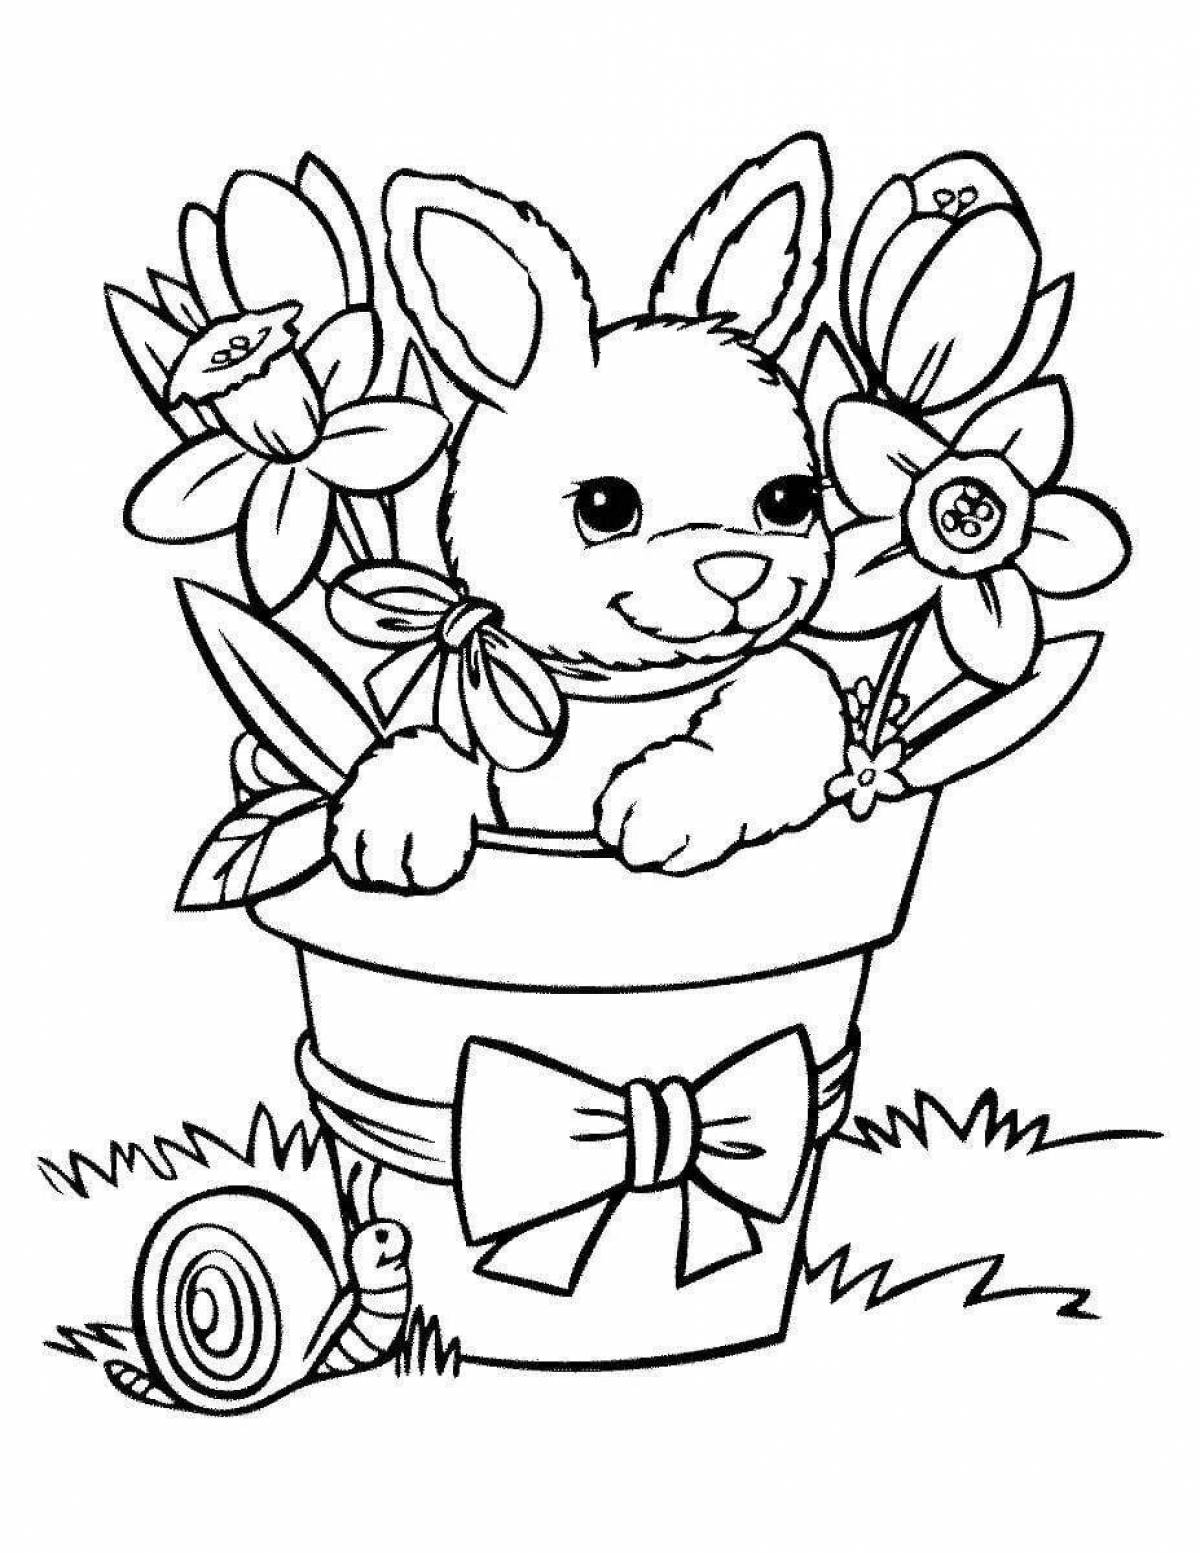 Exquisite rabbit coloring for girls